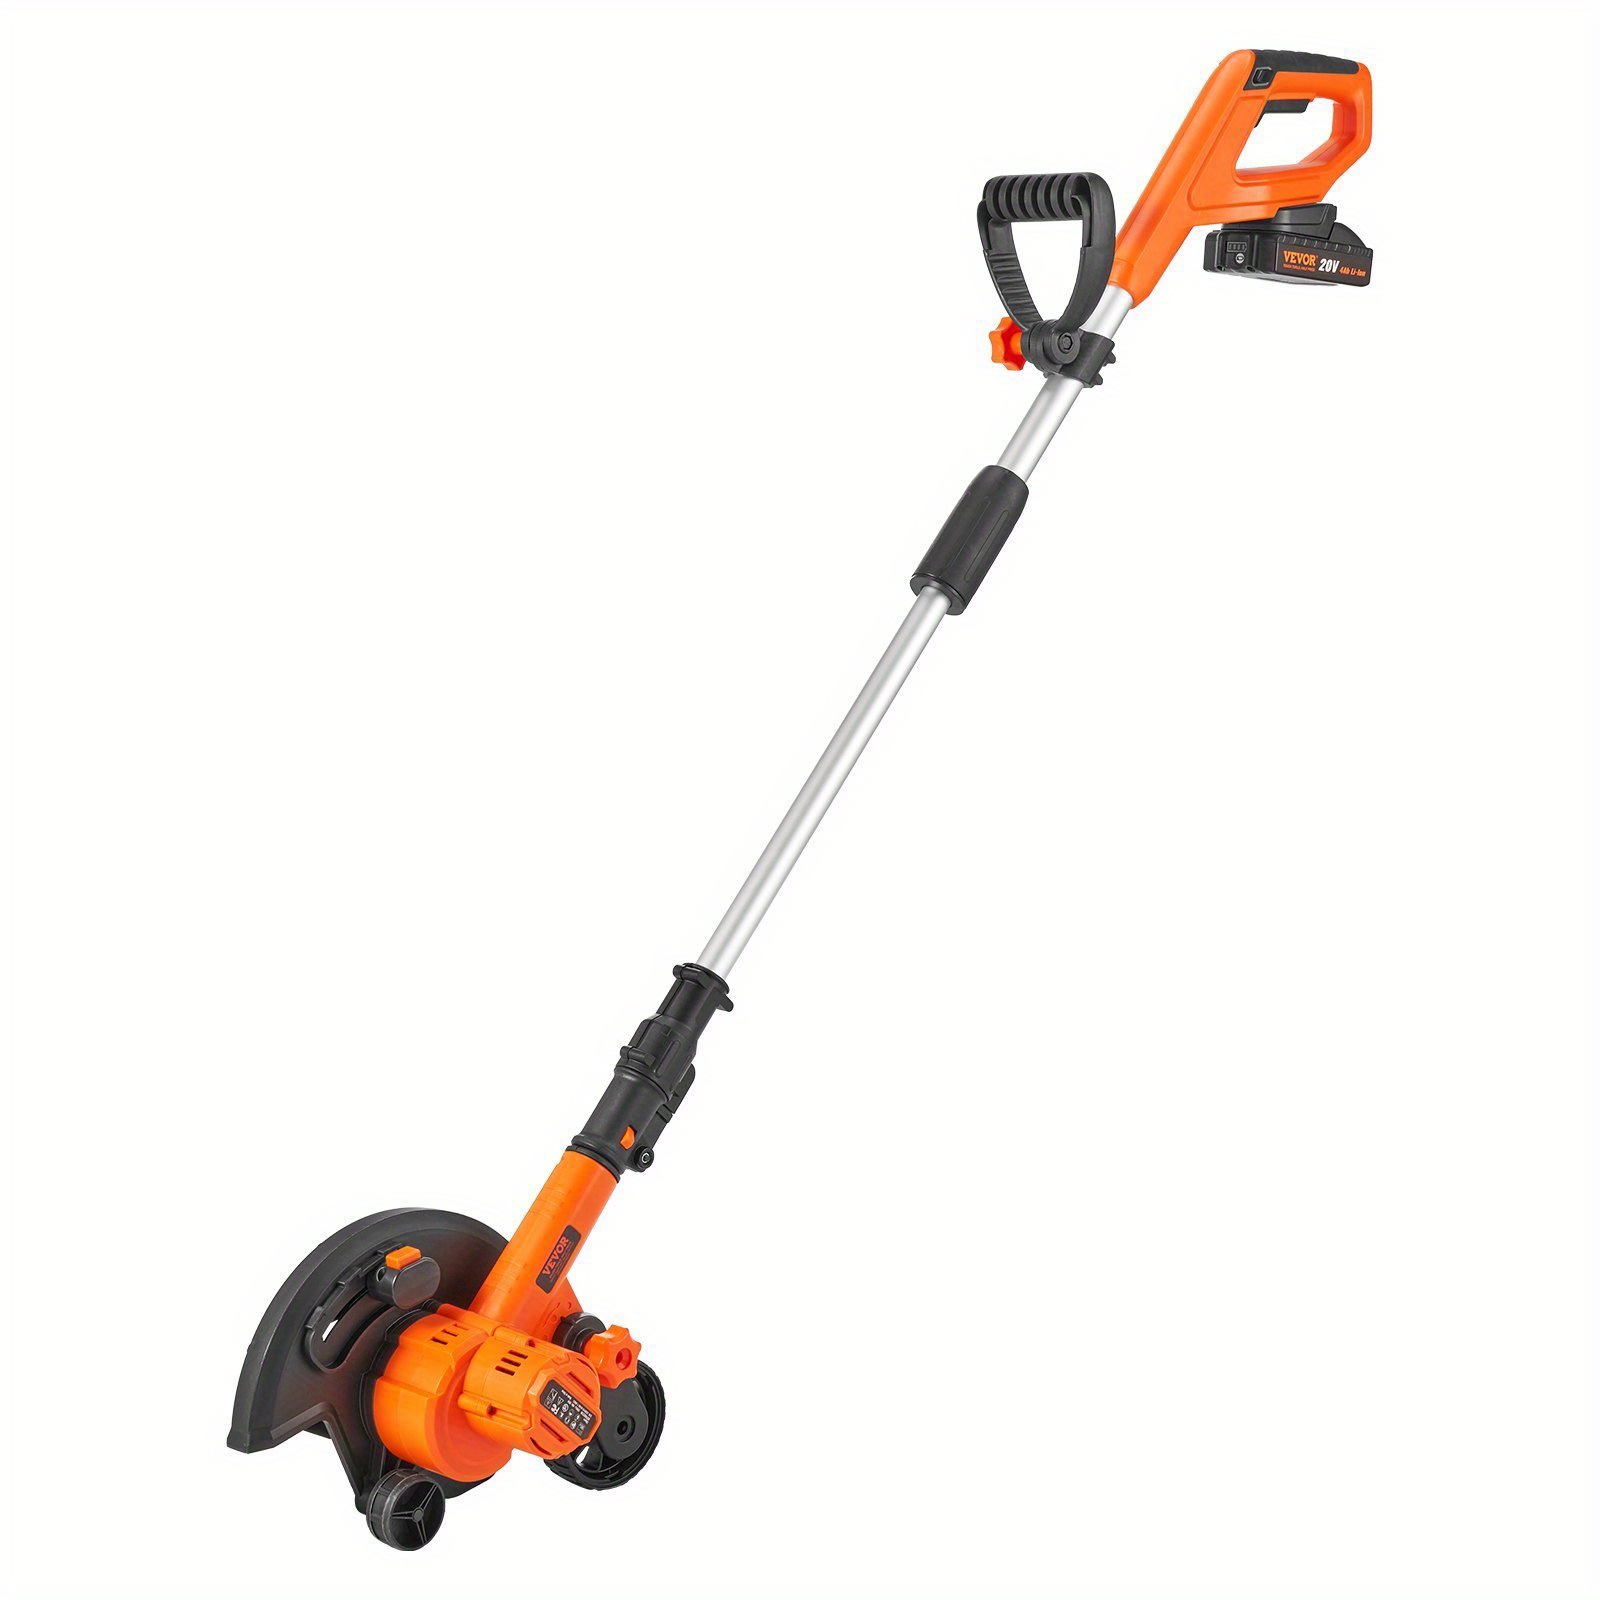 

Lawn Edger, Battery Powered Cordless Edger, 9-inch Blade Edger Lawn Tool With 3-position Blade Depth, Battery And Charger Included, For Lawns, Driveways, Borders, And Sidewalk Edges